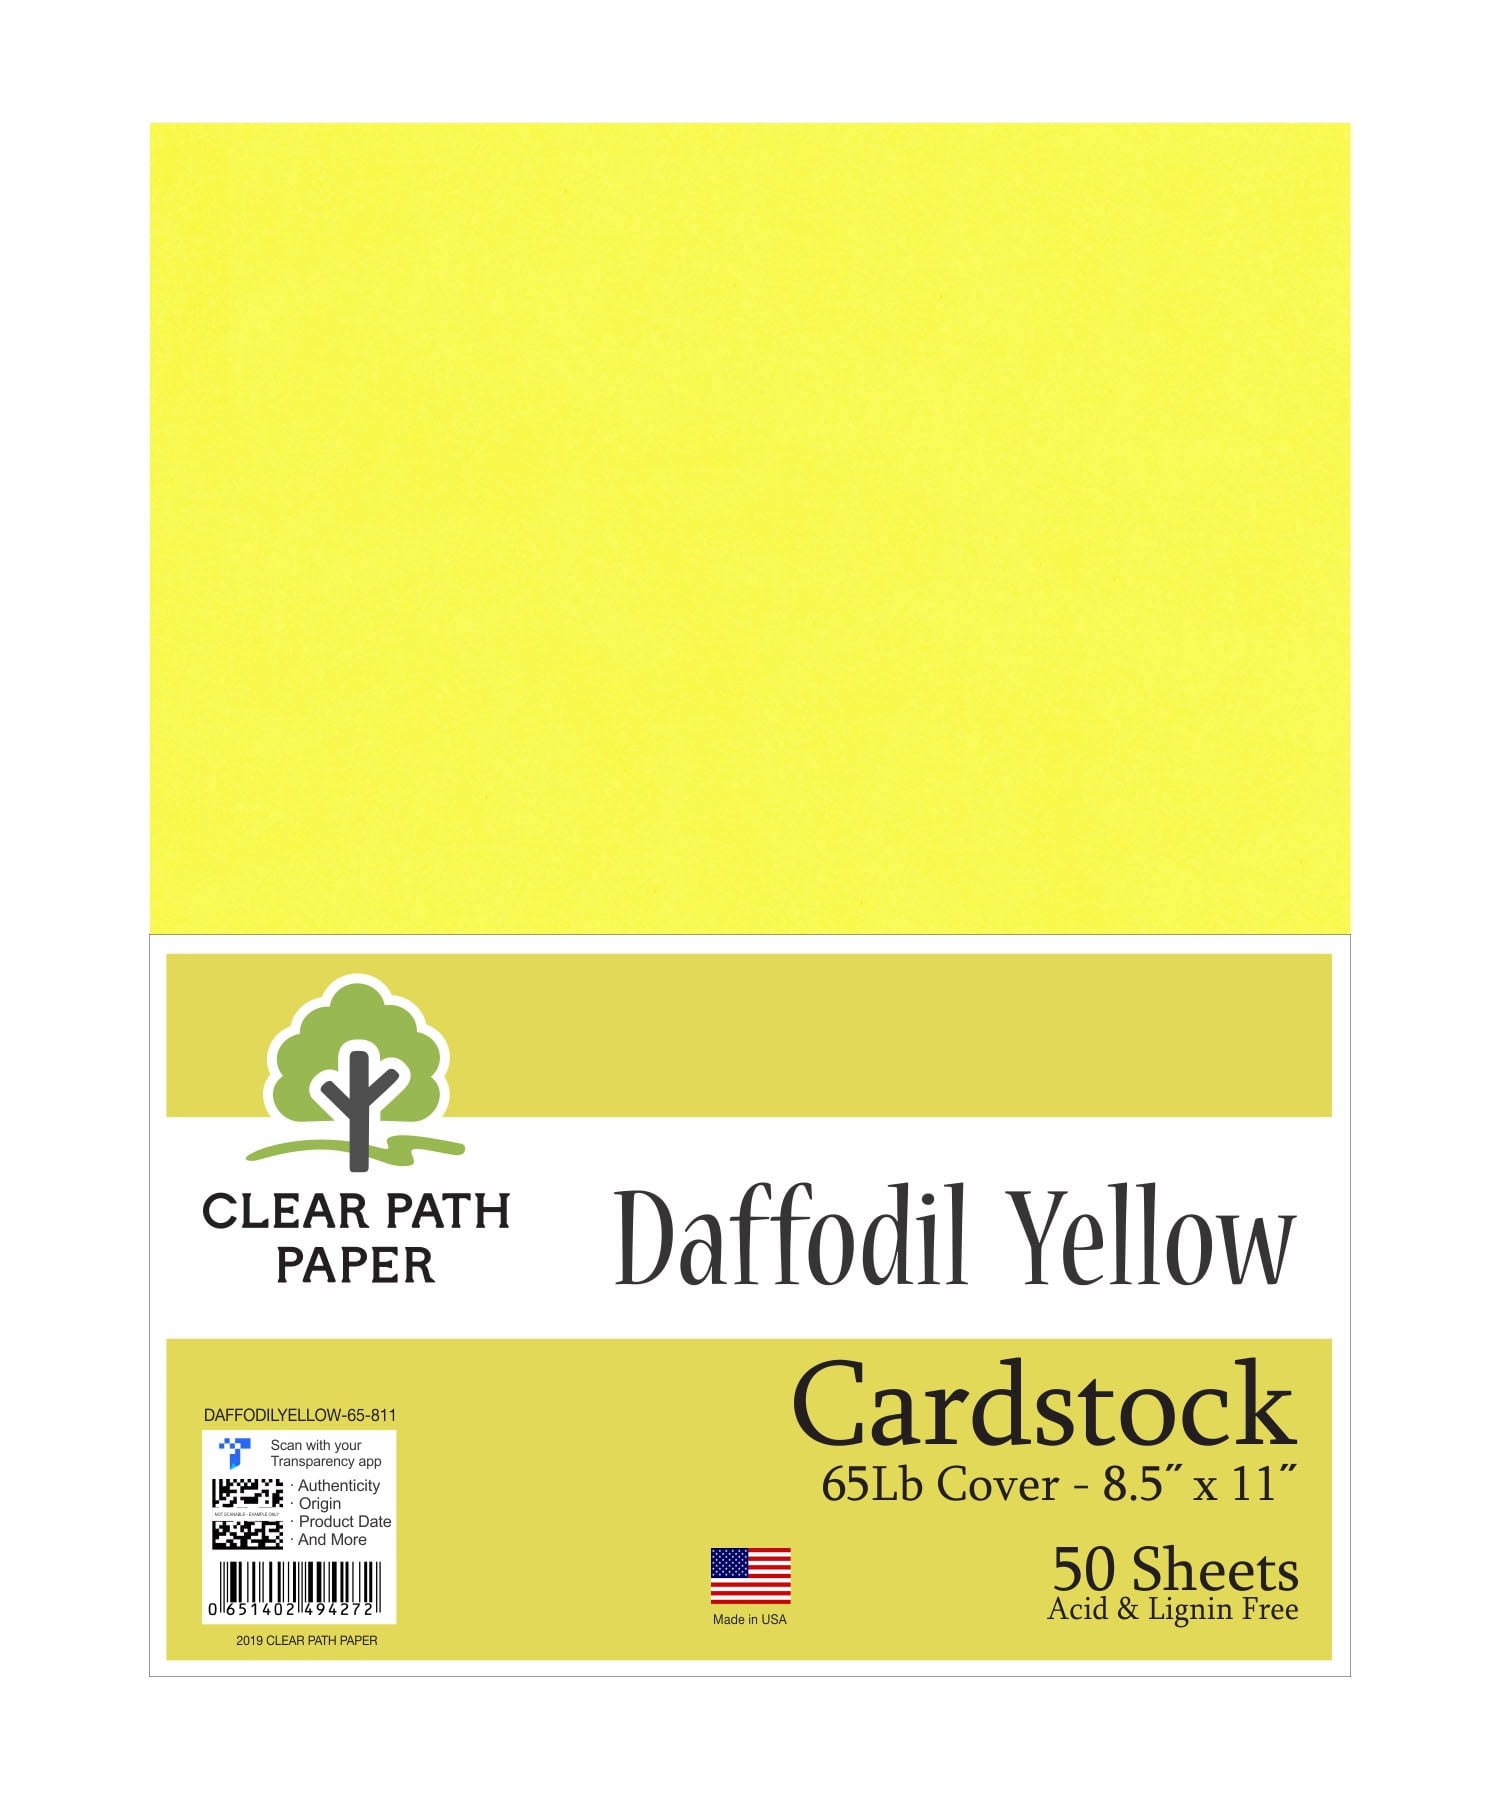 50 Sheets 65Lb Cover 8.5 x 11 inch Daffodil Yellow Cardstock 